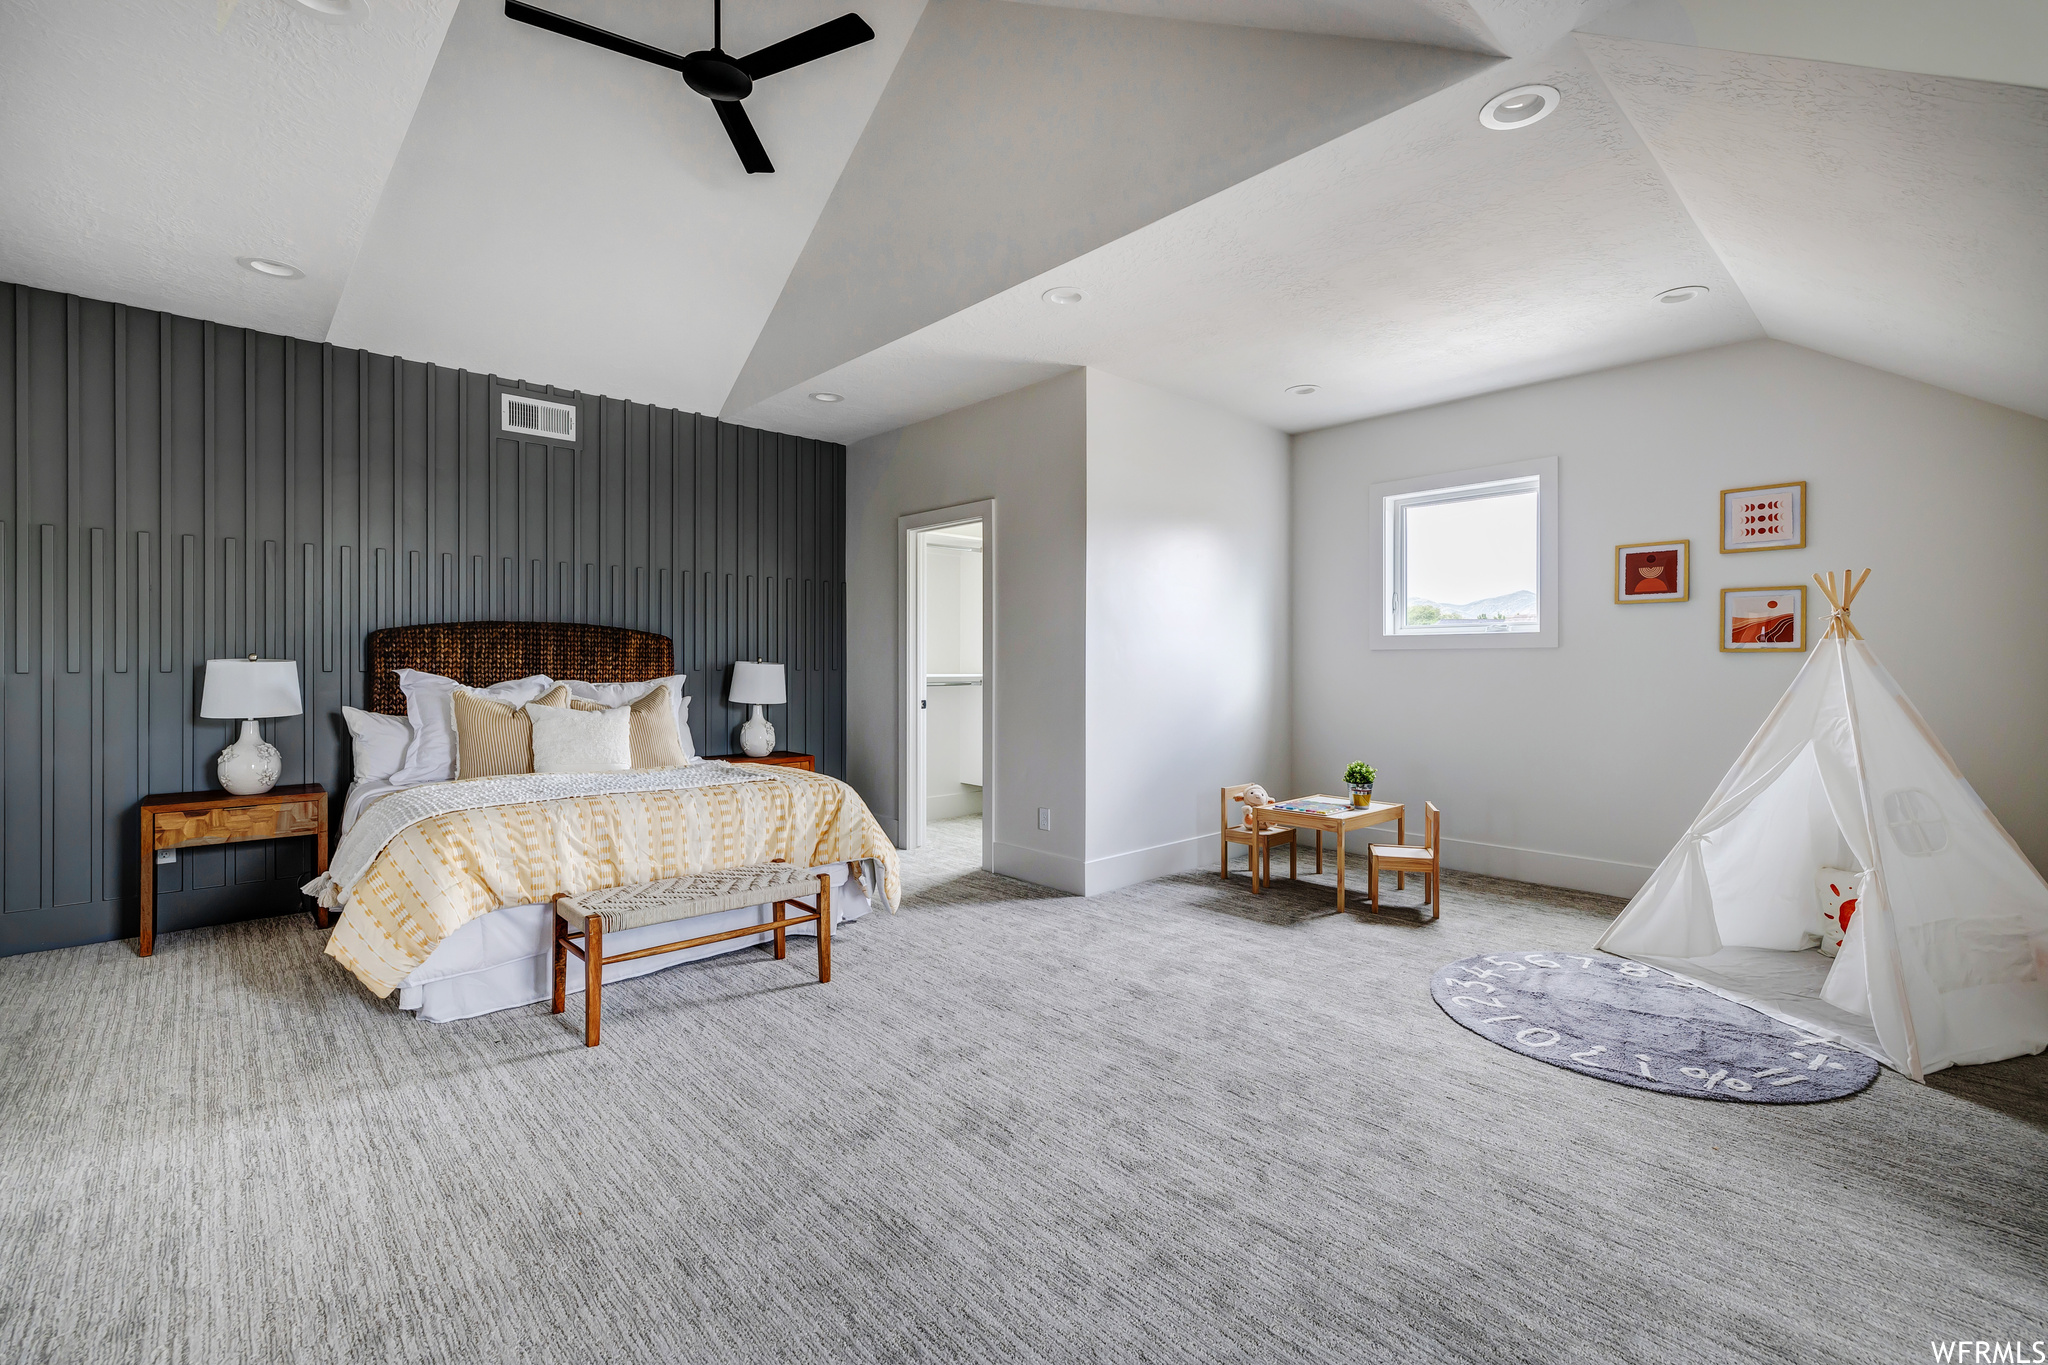 Bedroom featuring ceiling fan, lofted ceiling, and light colored carpet